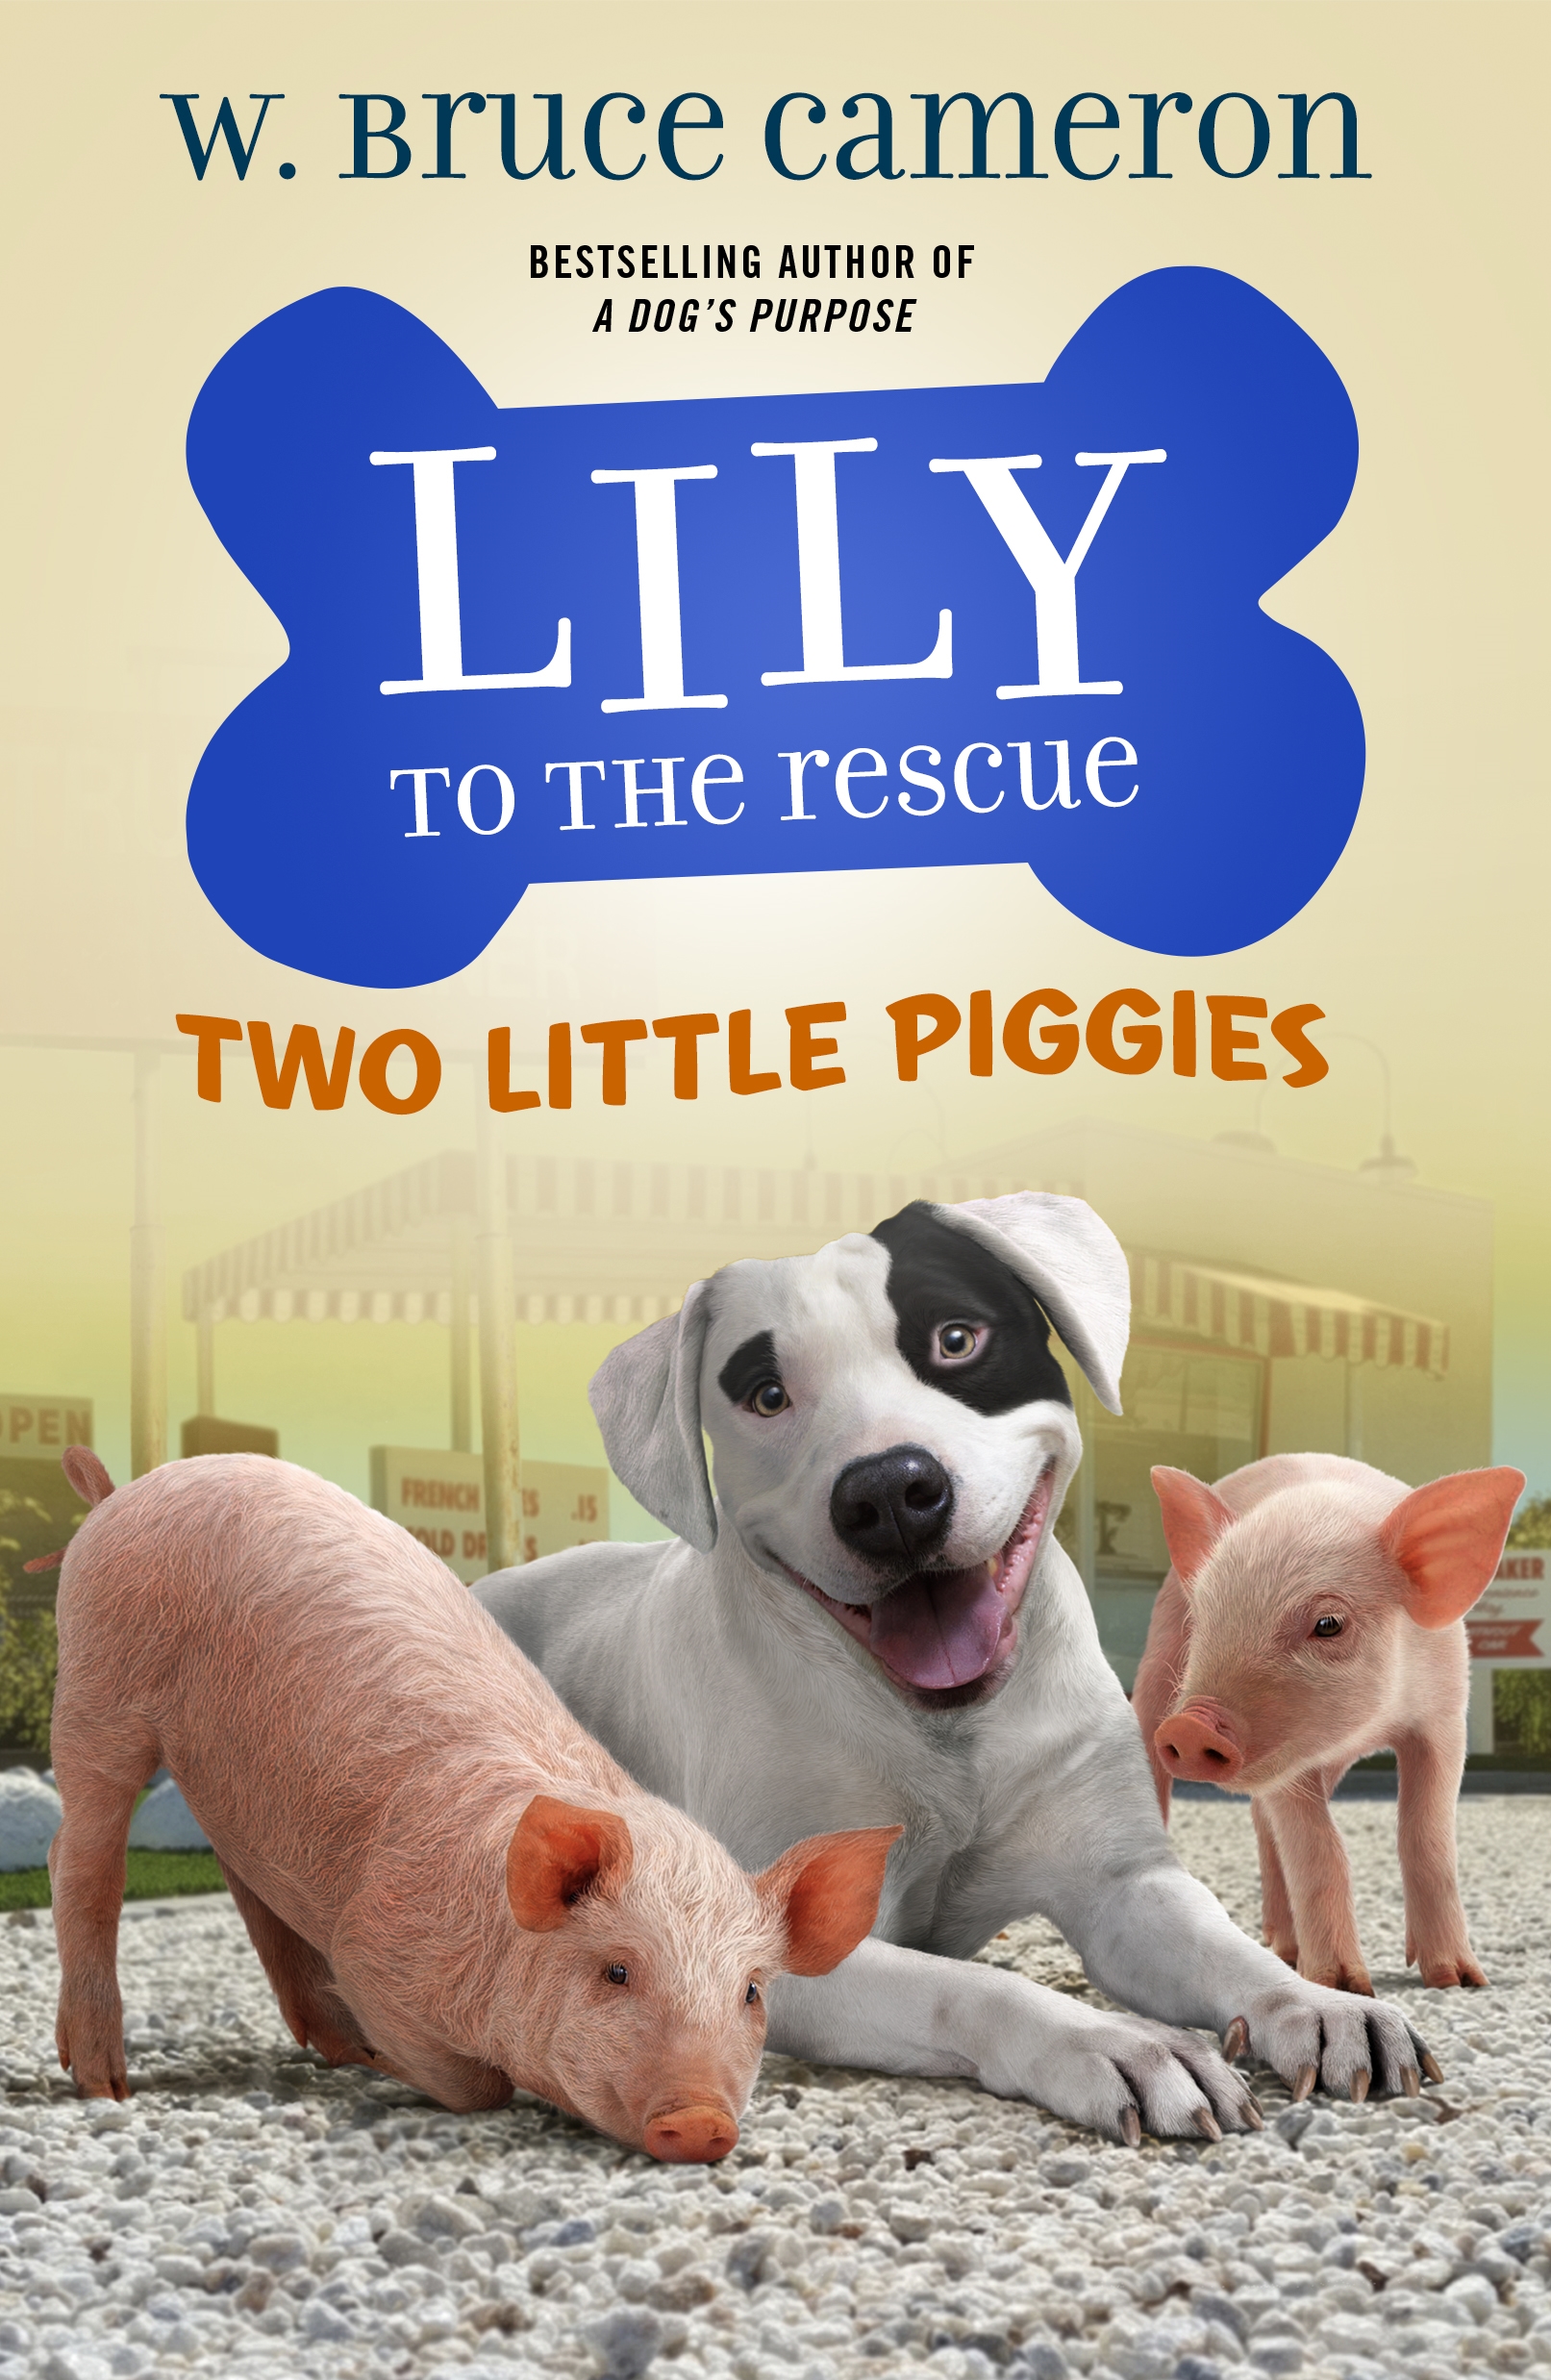 Lily to the Rescue: Two Little Piggies by W. Bruce Cameron, Jennifer L. Meyer